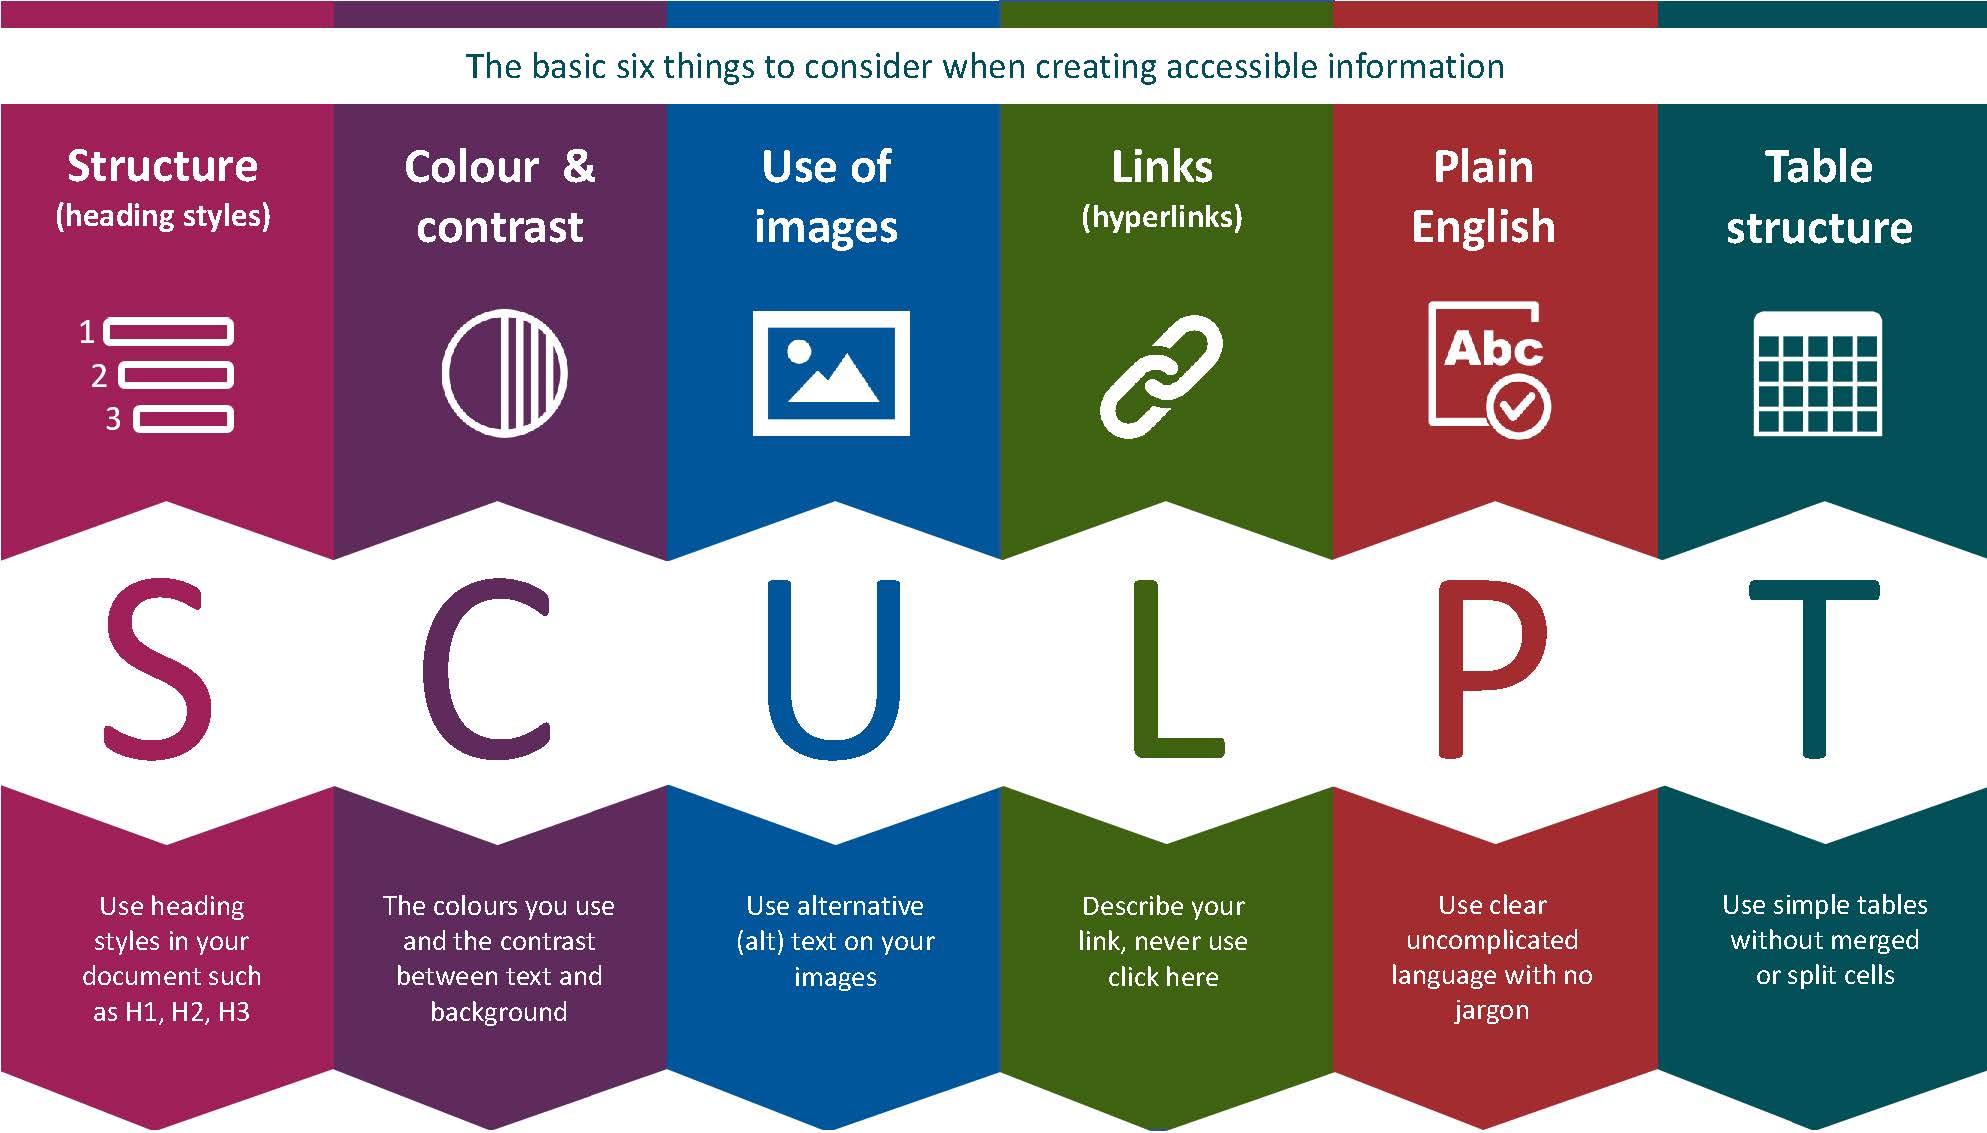 SCUPLT infographic showing the headings of Structure, Colour/Contrast, Use of Images, Links, Plain English, Table Structure with colour divisions between each letter of the acronym